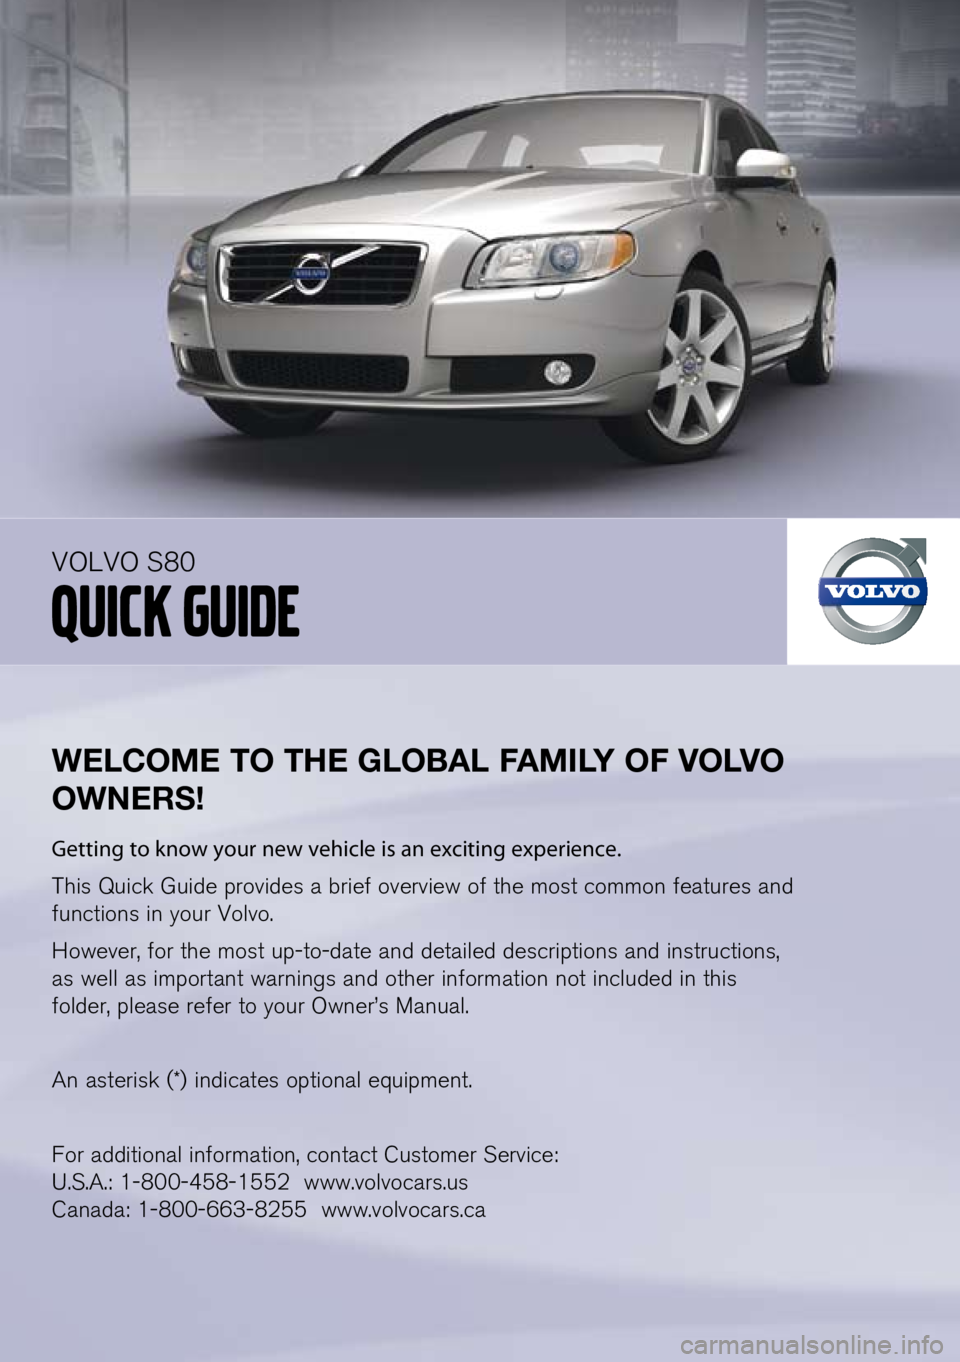 VOLVO S80 2012  Quick Guide 
WElCOME TO THE G lOBA l FAMI lY OF  vO lv O 
OWNERS!
Getting to know your new vehicle is an exciting experience.
This Quick Guide provides a brief overview of the most common features and 
functions 